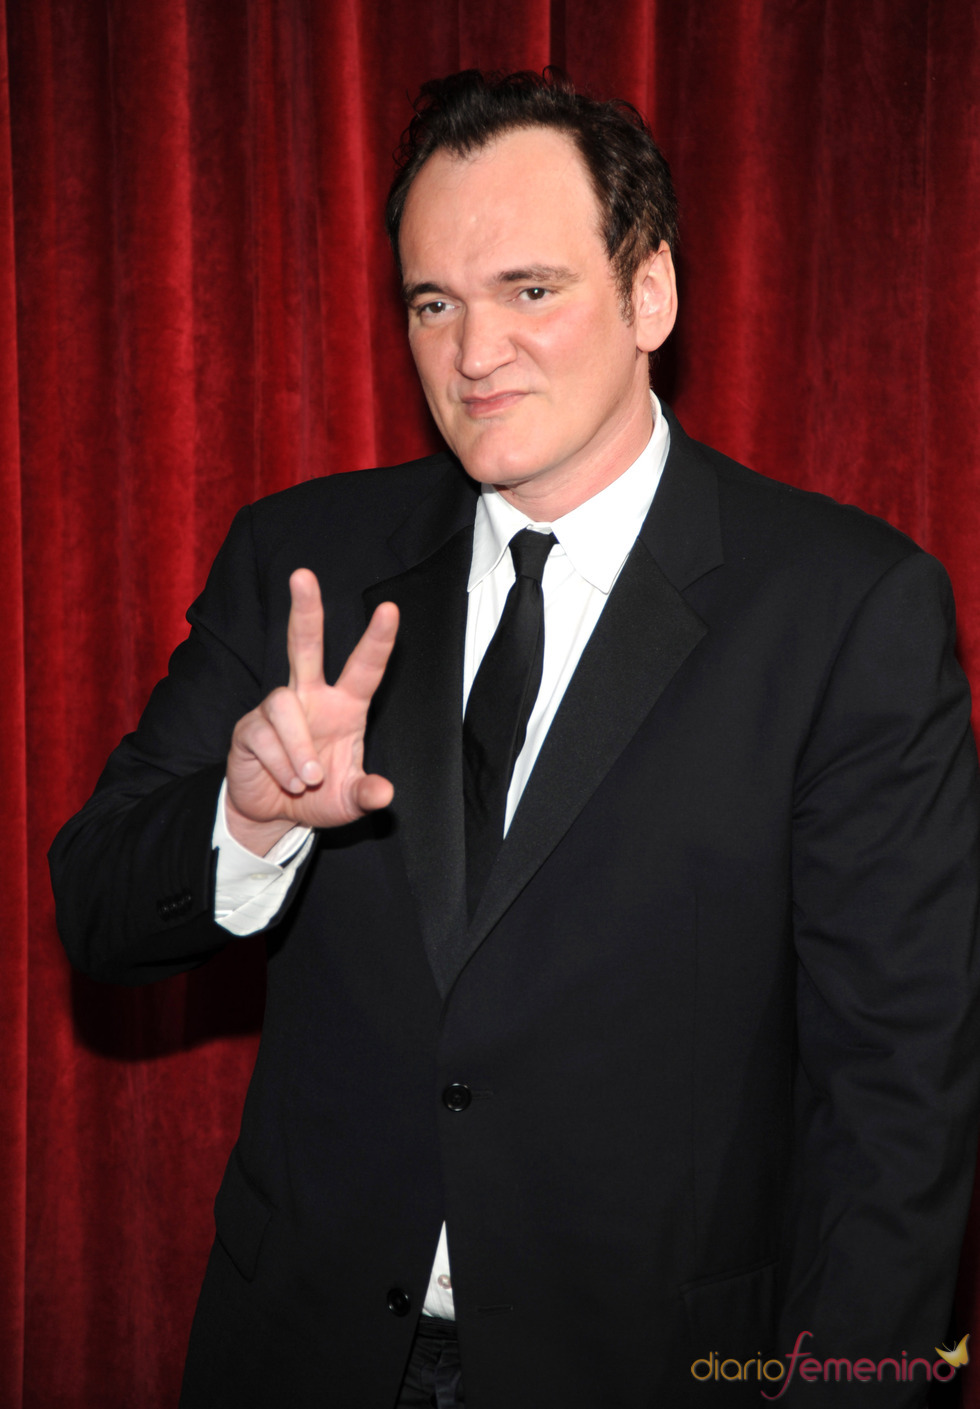 Quentin Tarantino - Images Gallery